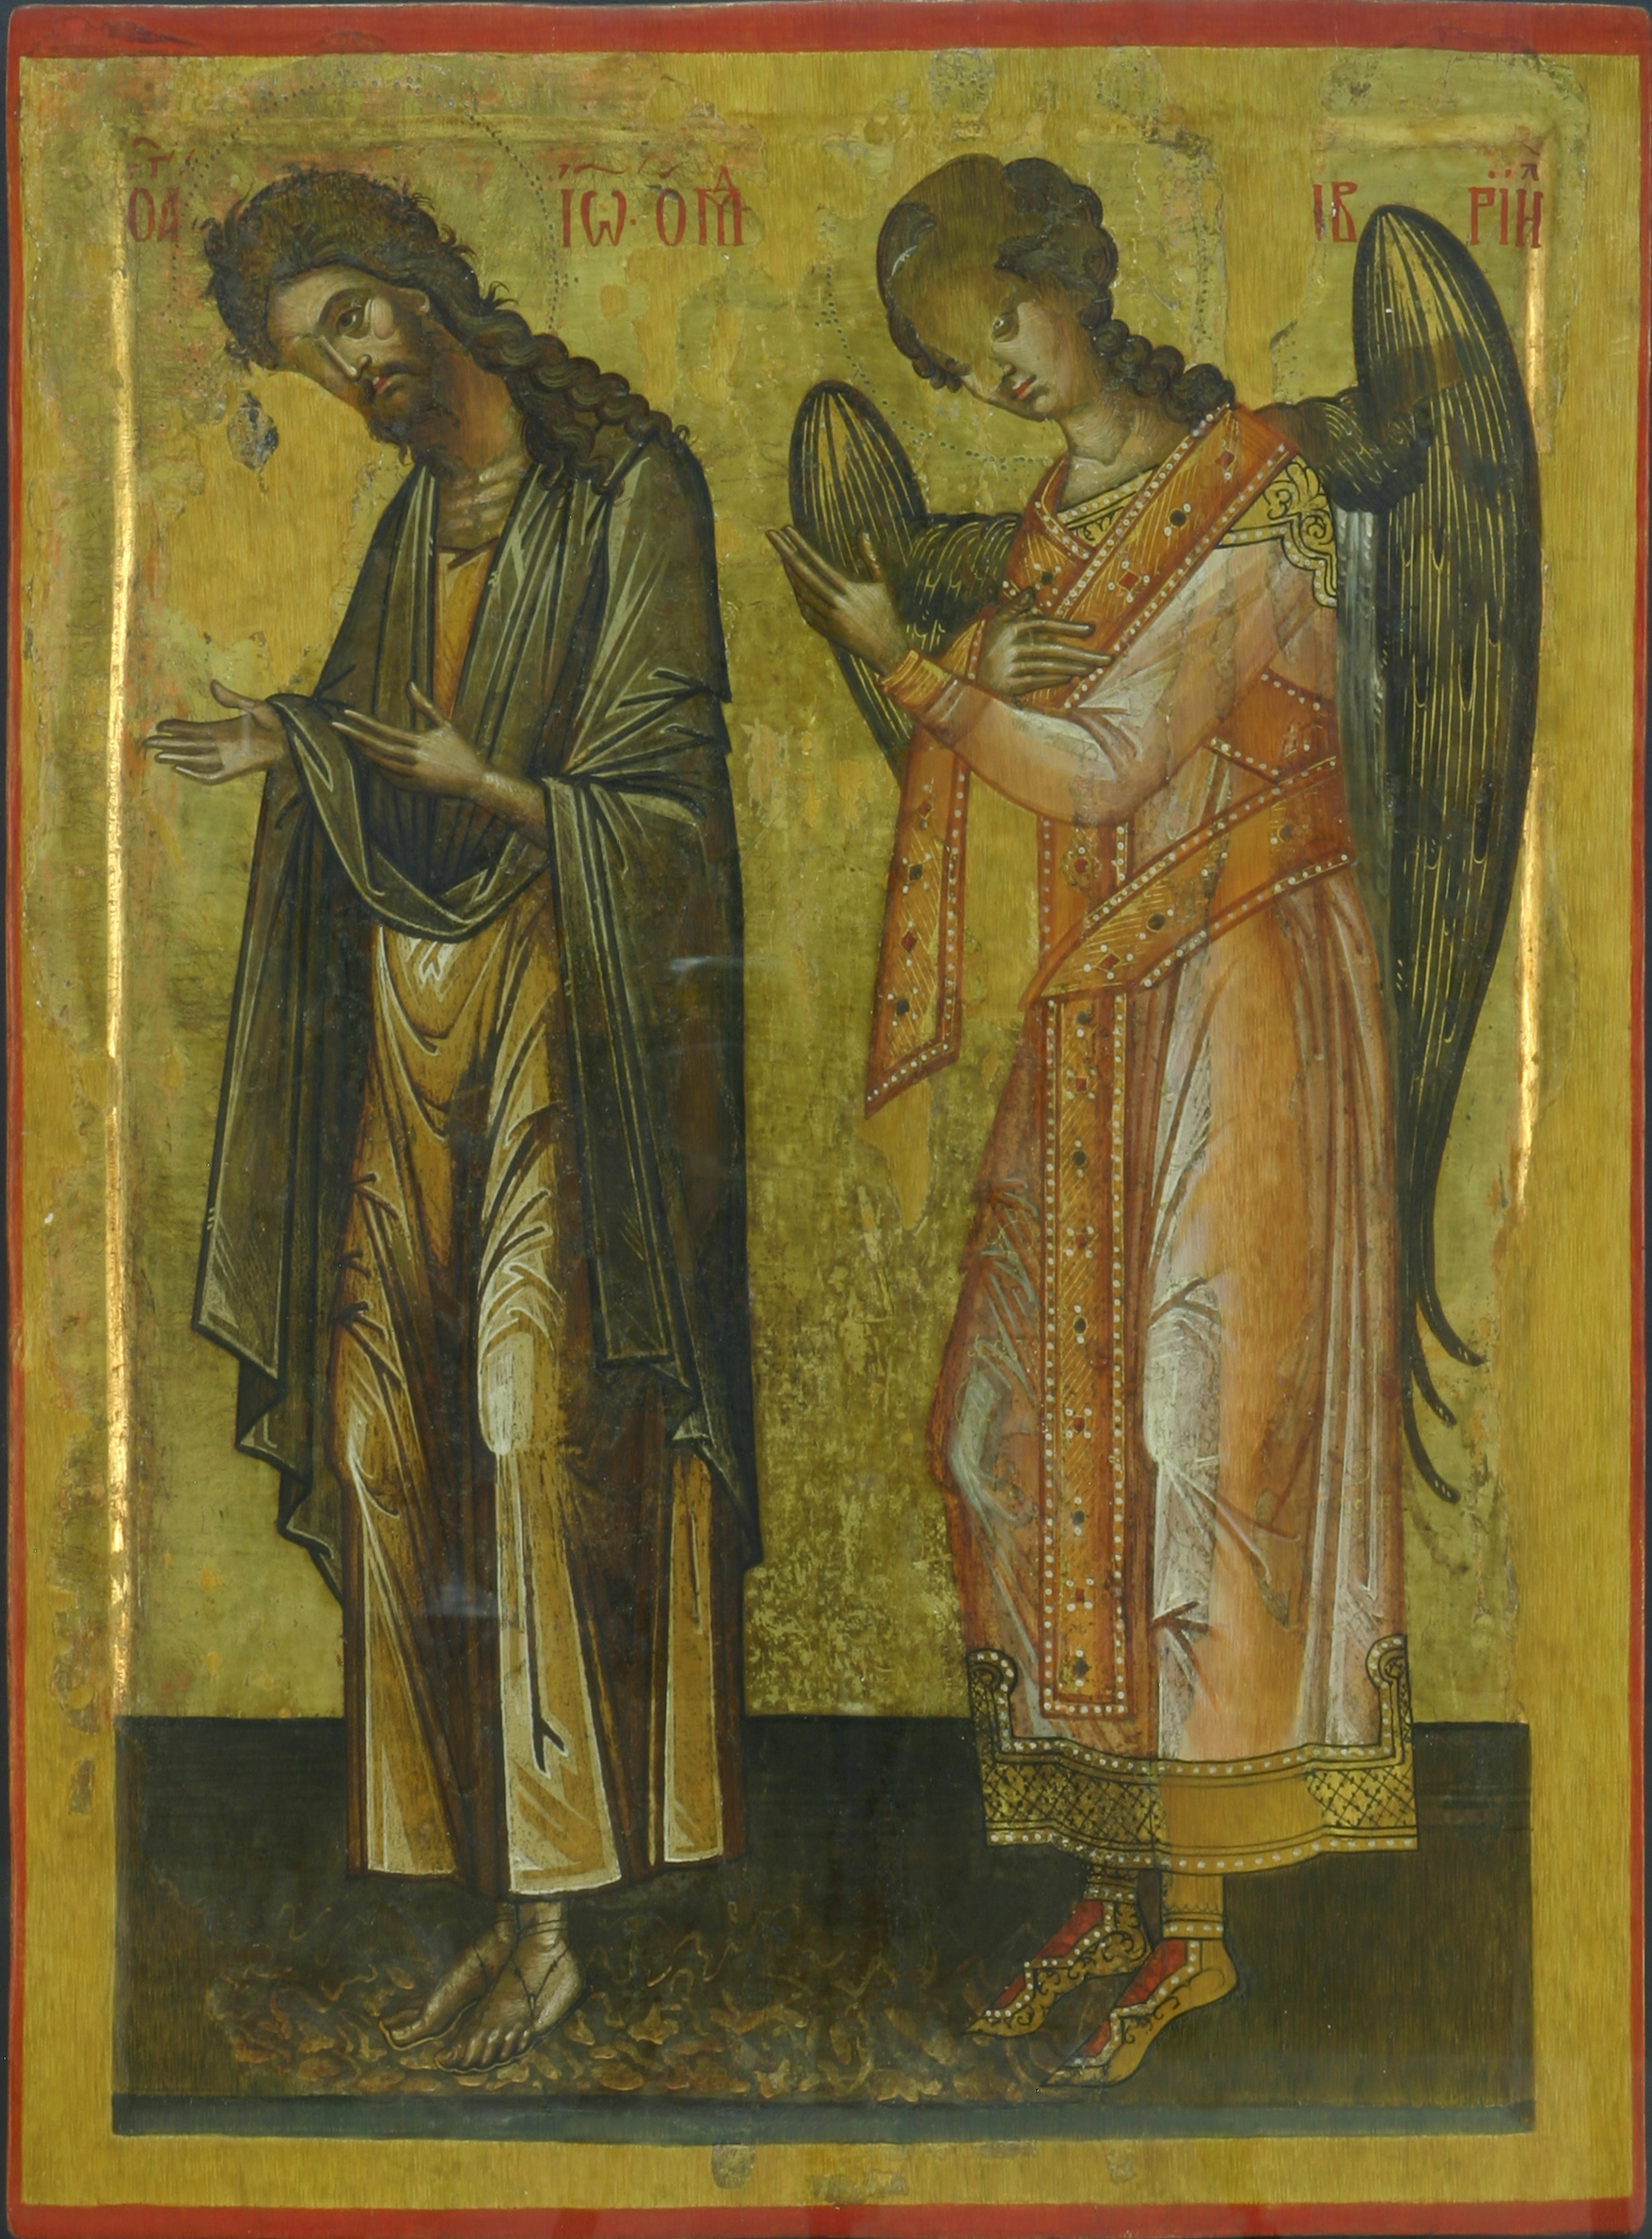 Icon from a Deësis iconostasis row, early 16th century, 71 x 51 cm, collection of the Romanian Orthodox Patriarchate, Bucharest, in custody at the National Museum of Art, Bucharest, 5869/ 1522  (source: National Museum of Art, Bucharest)